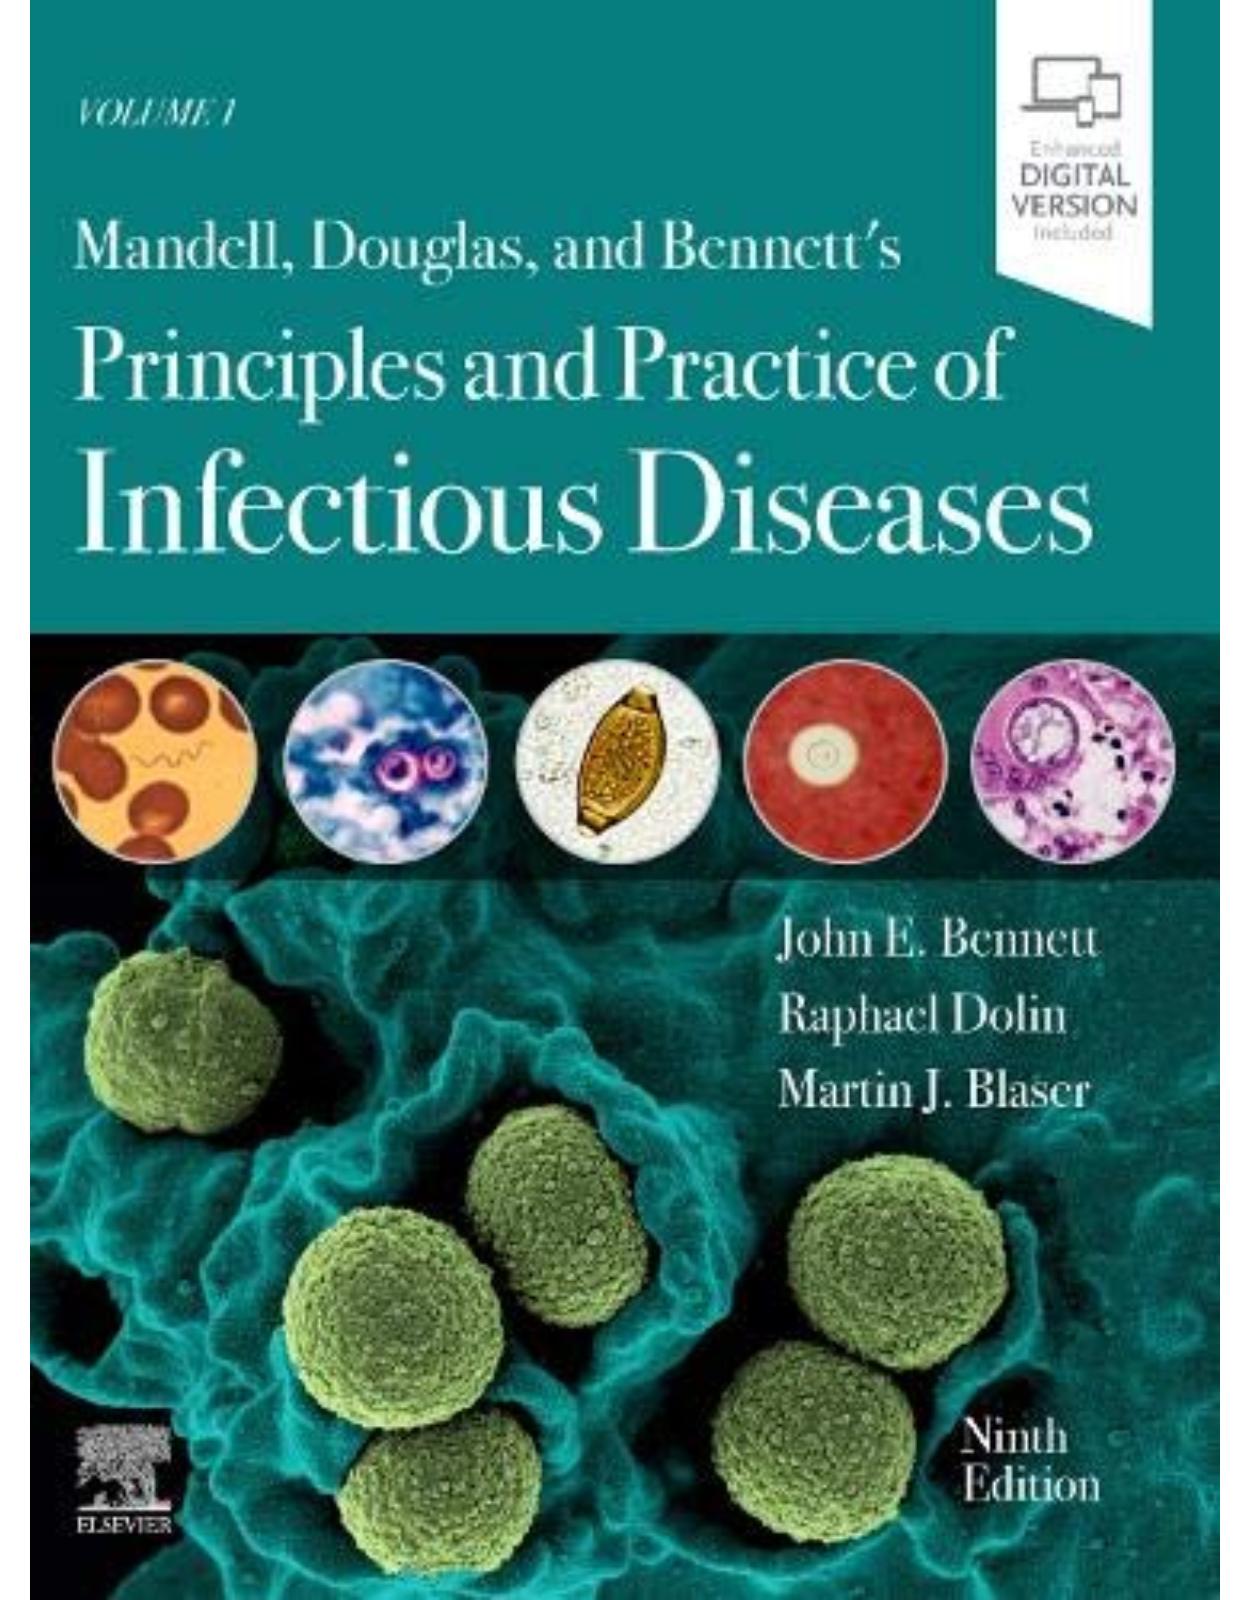 Mandell, Douglas, and Bennett s Principles and Practice of Infectious Diseases, 9th Edition 